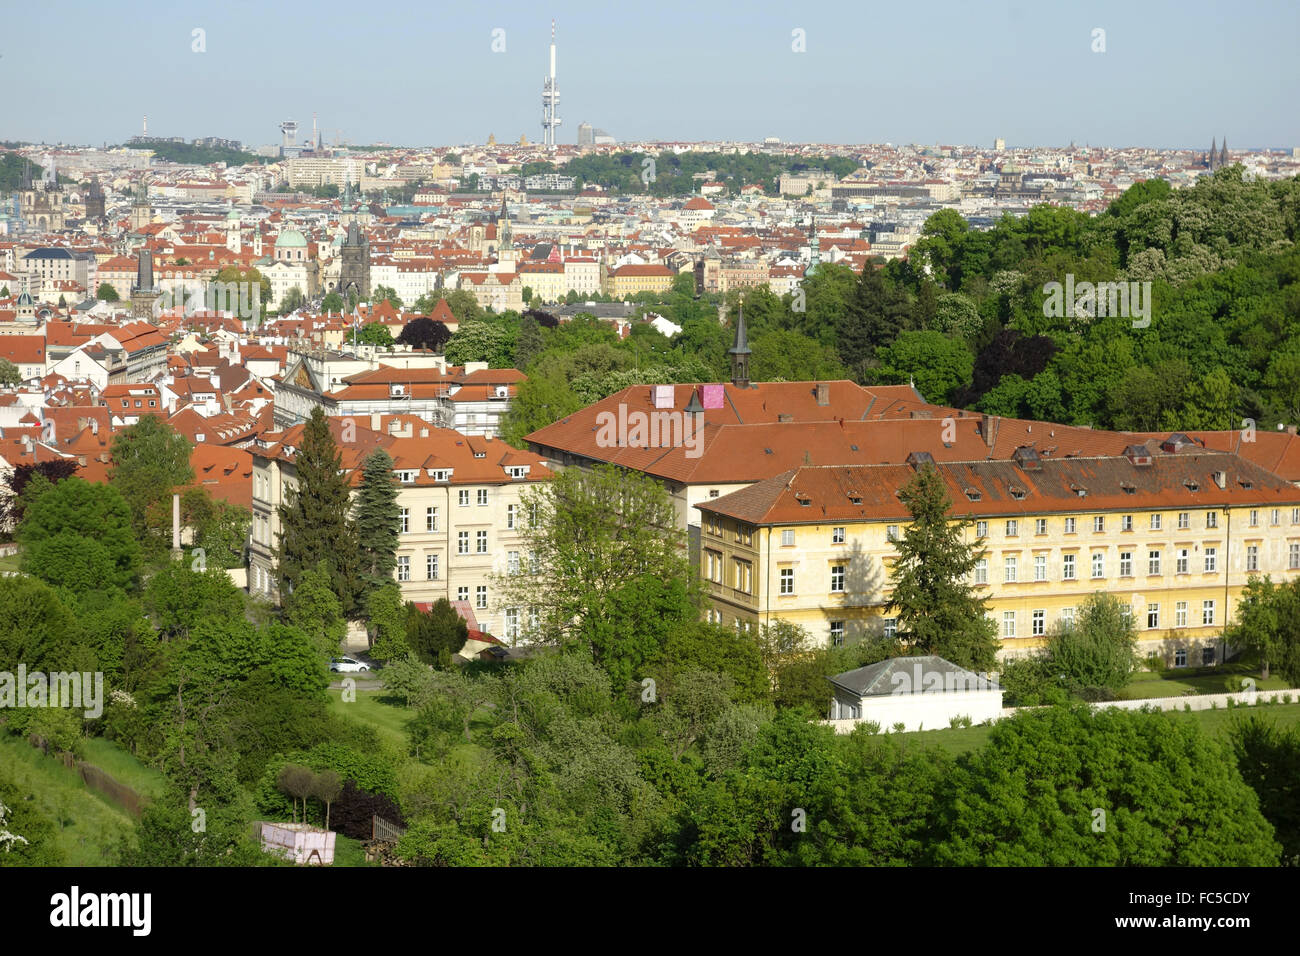 historical old city in prague Stock Photo